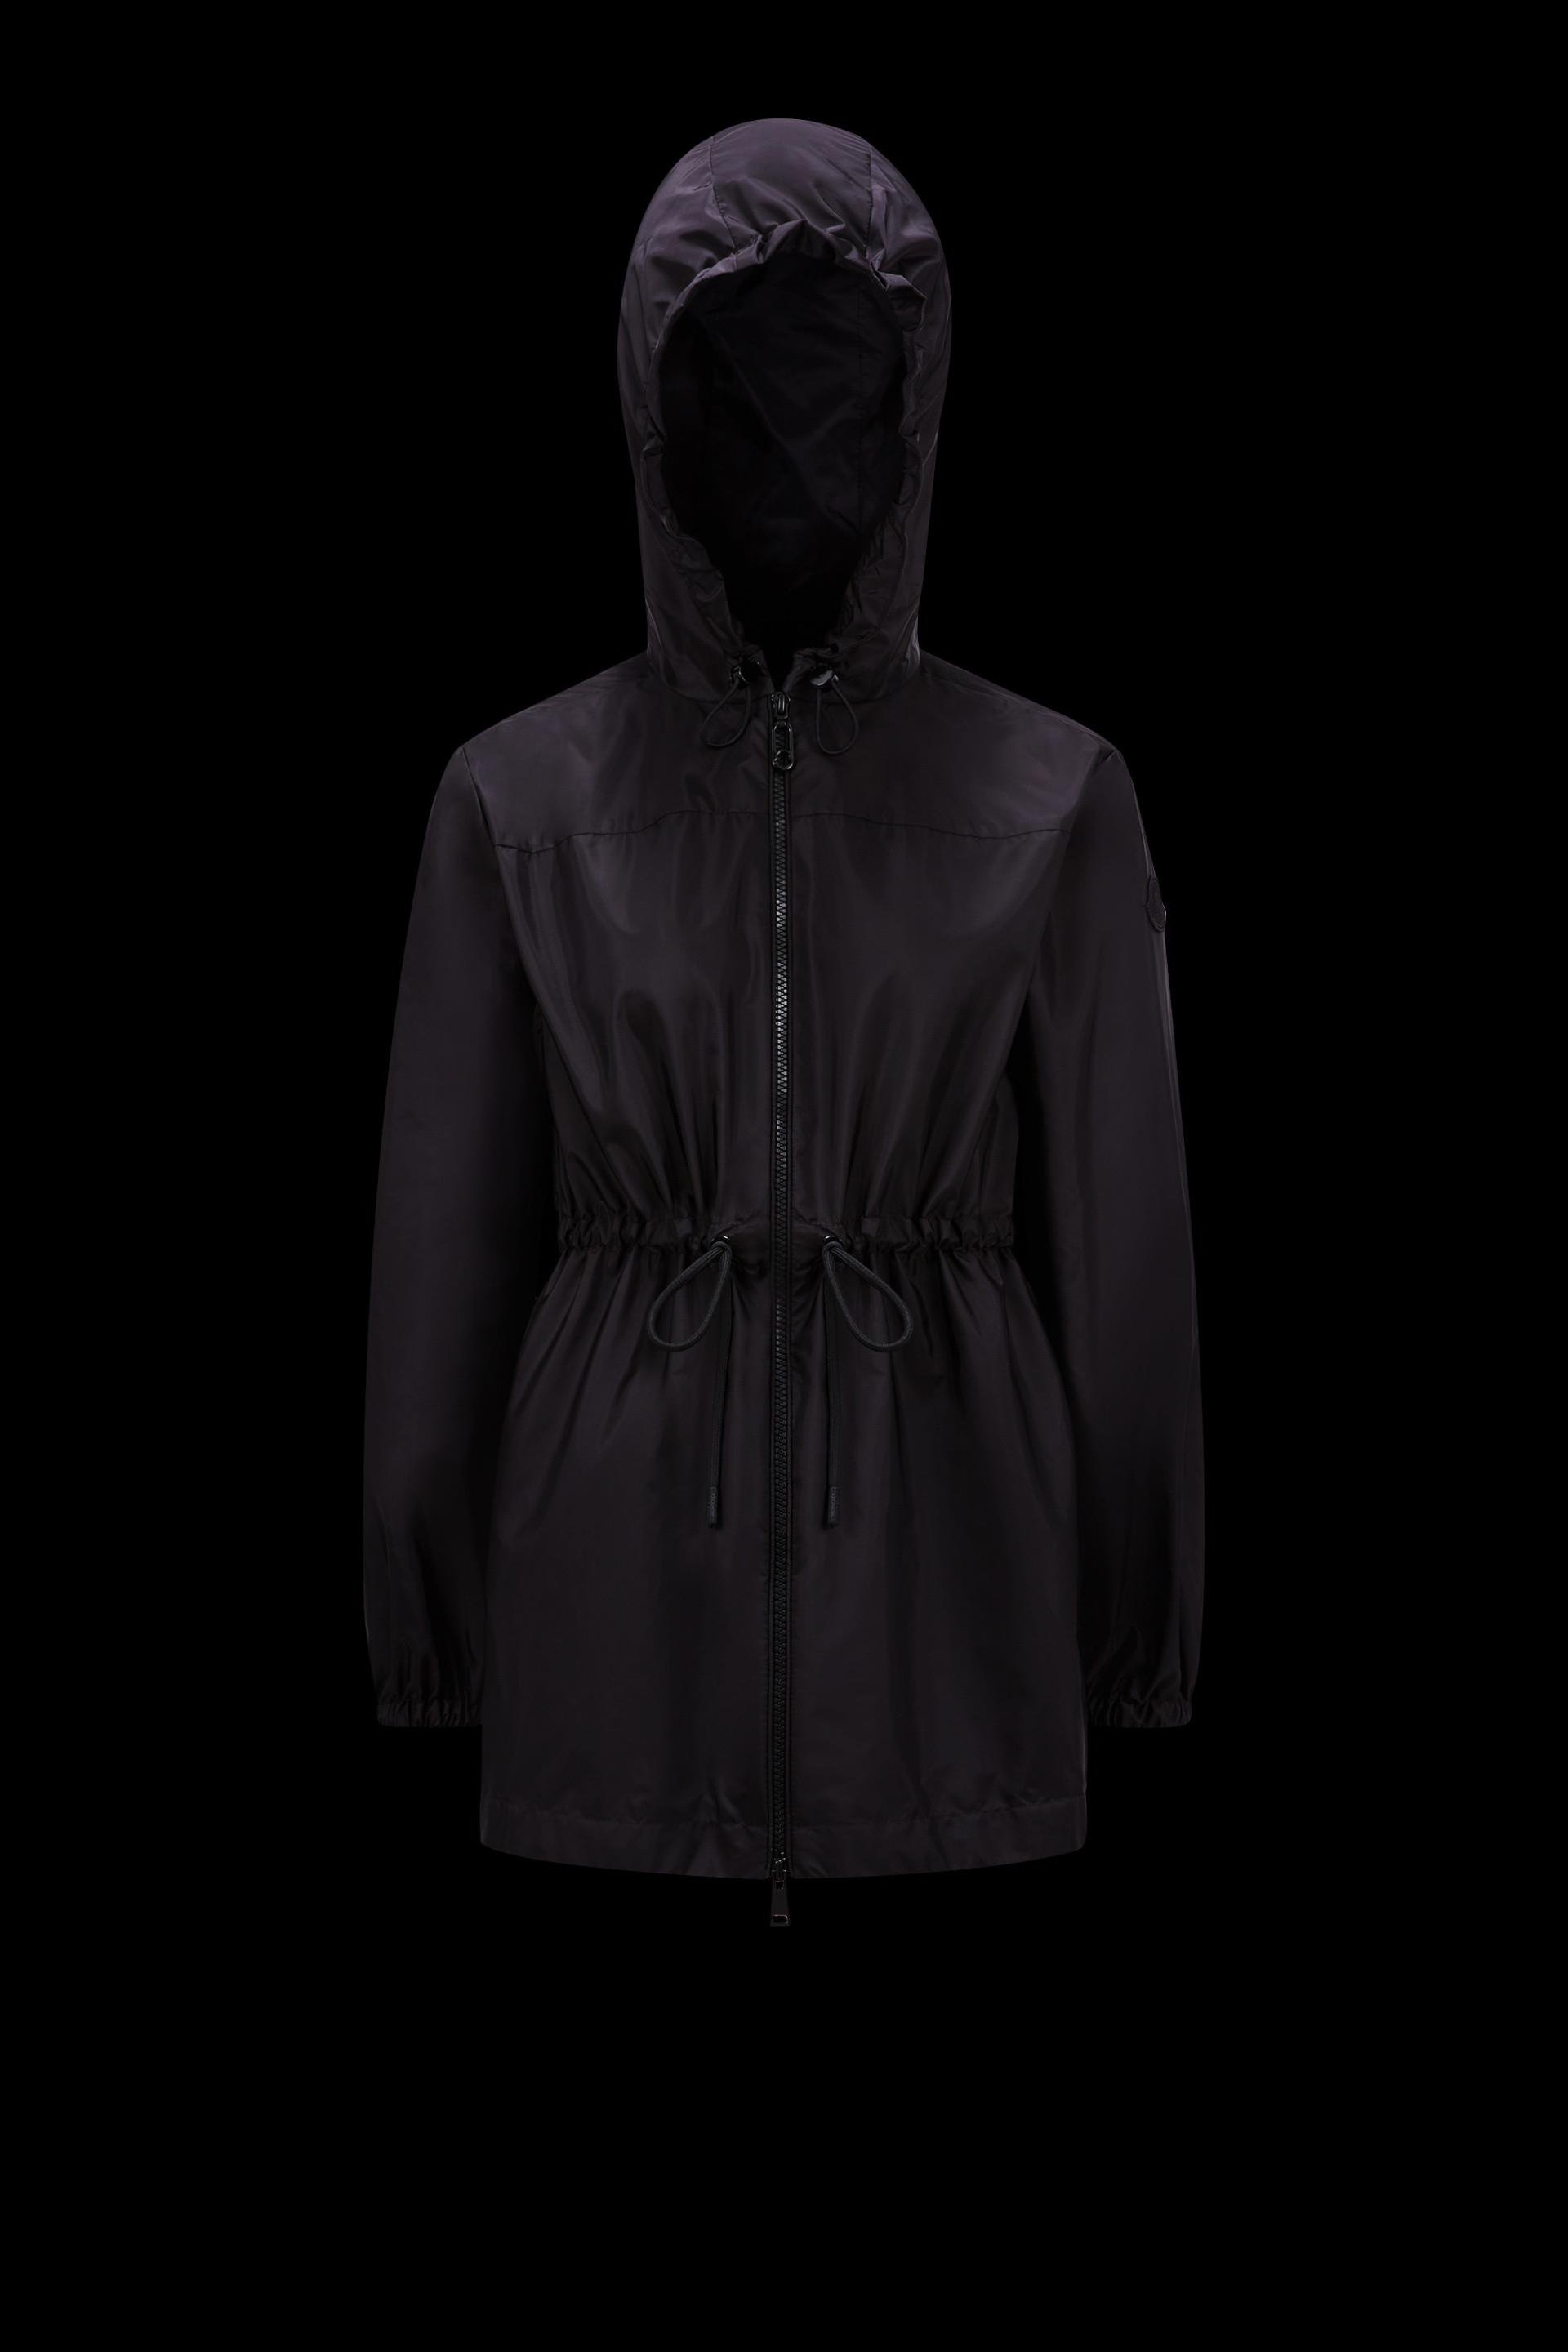 Filira Hooded Jacket by MONCLER